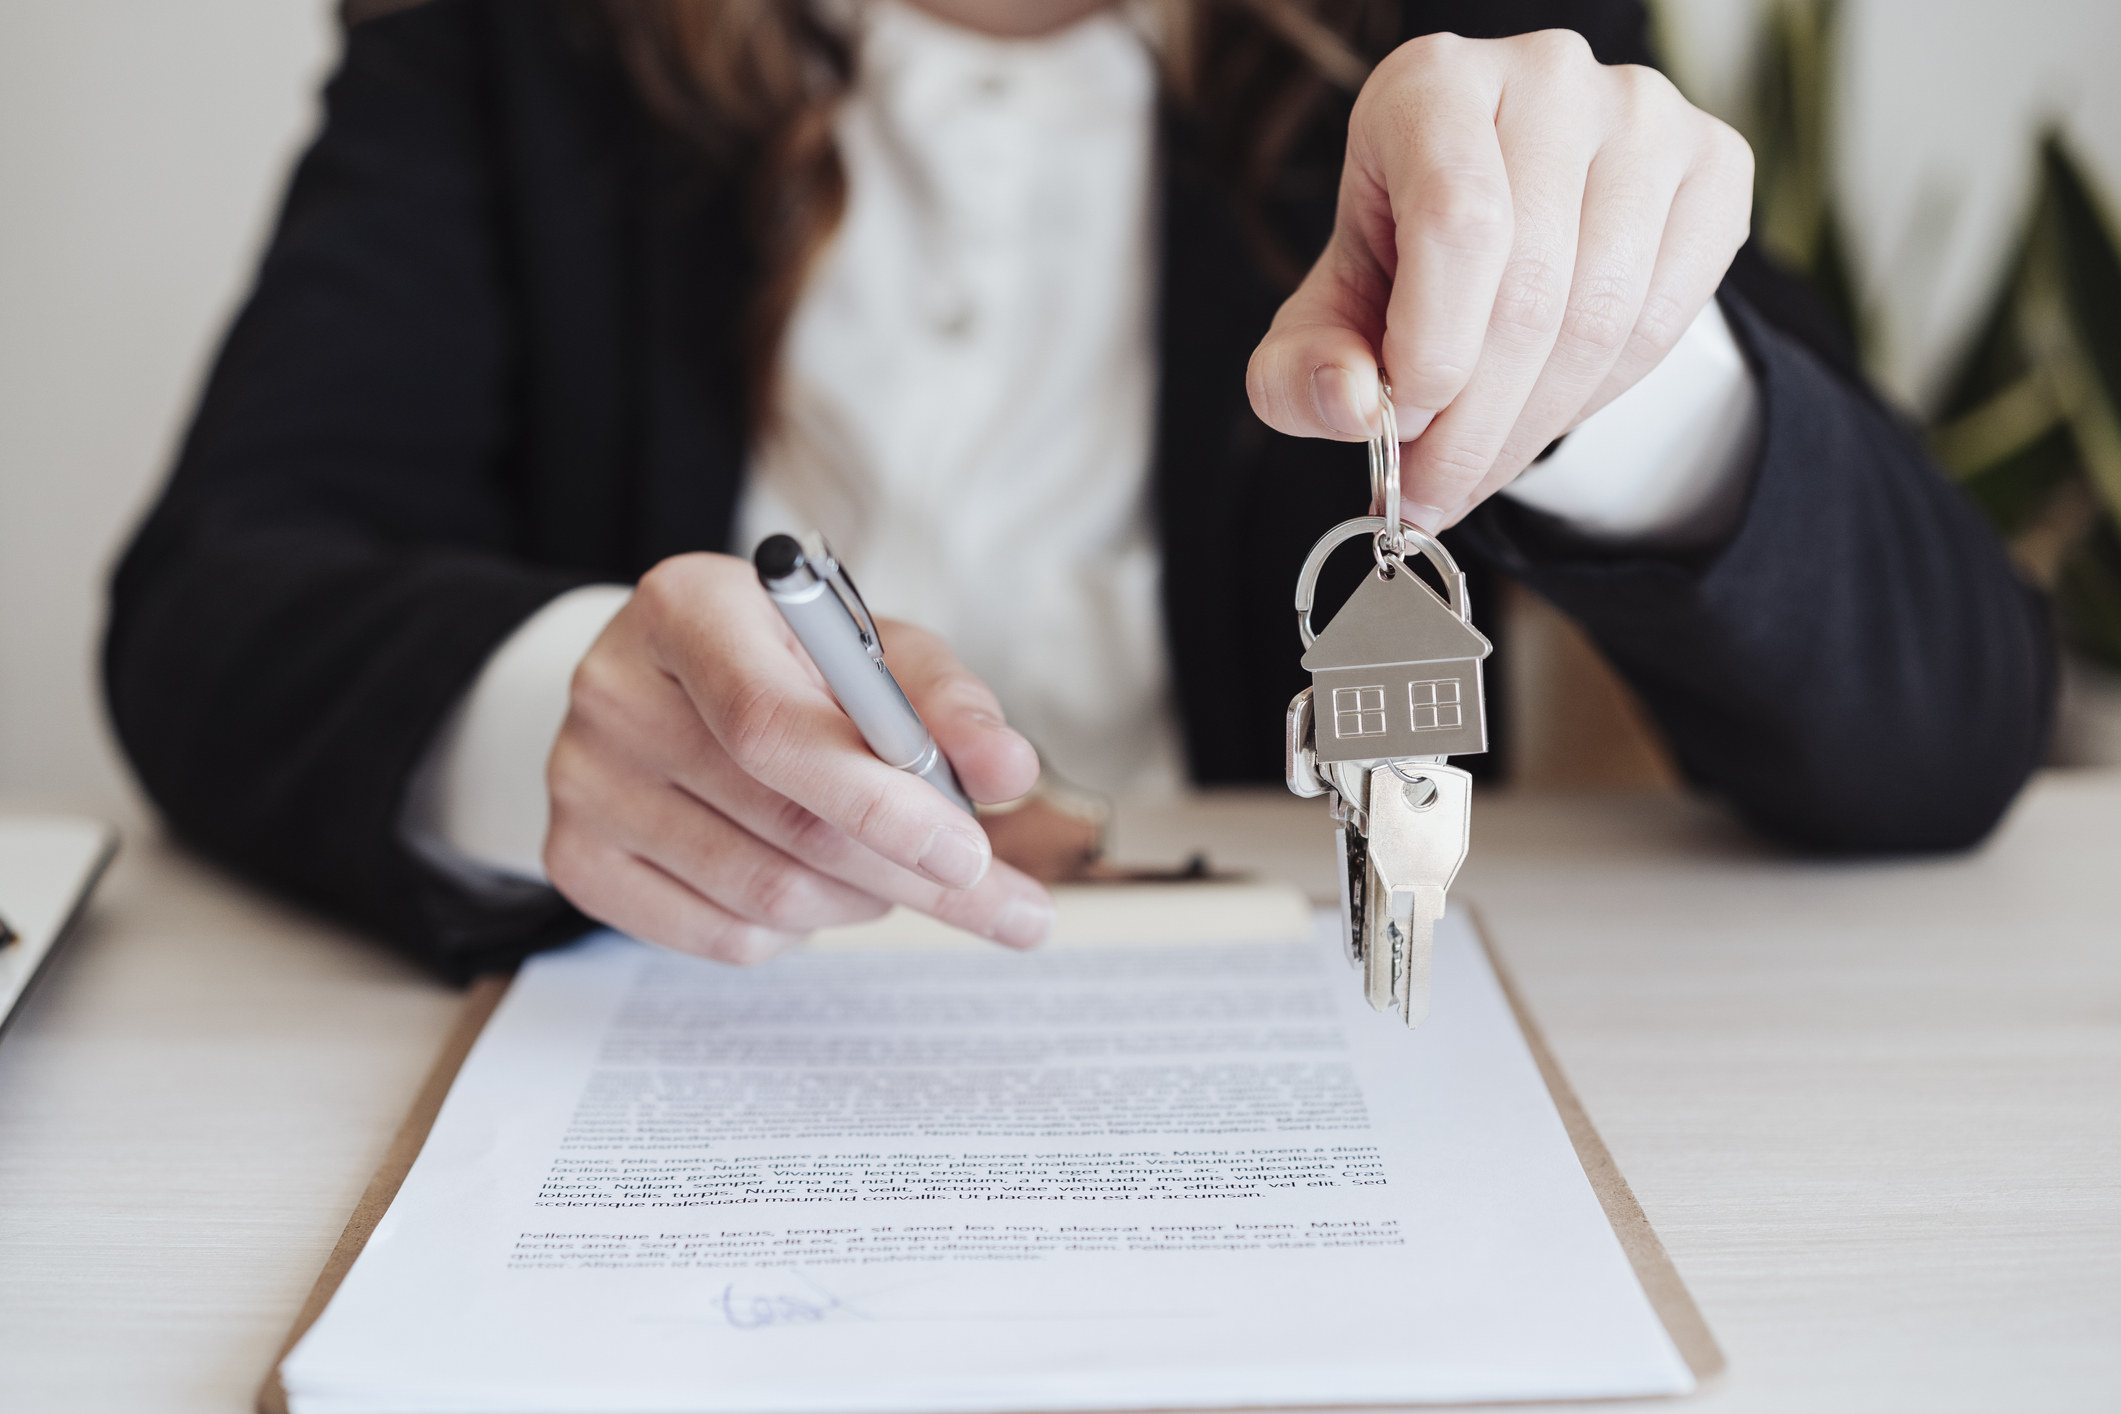 A real estate agent holding a pen some keys on a house-shaped keyring